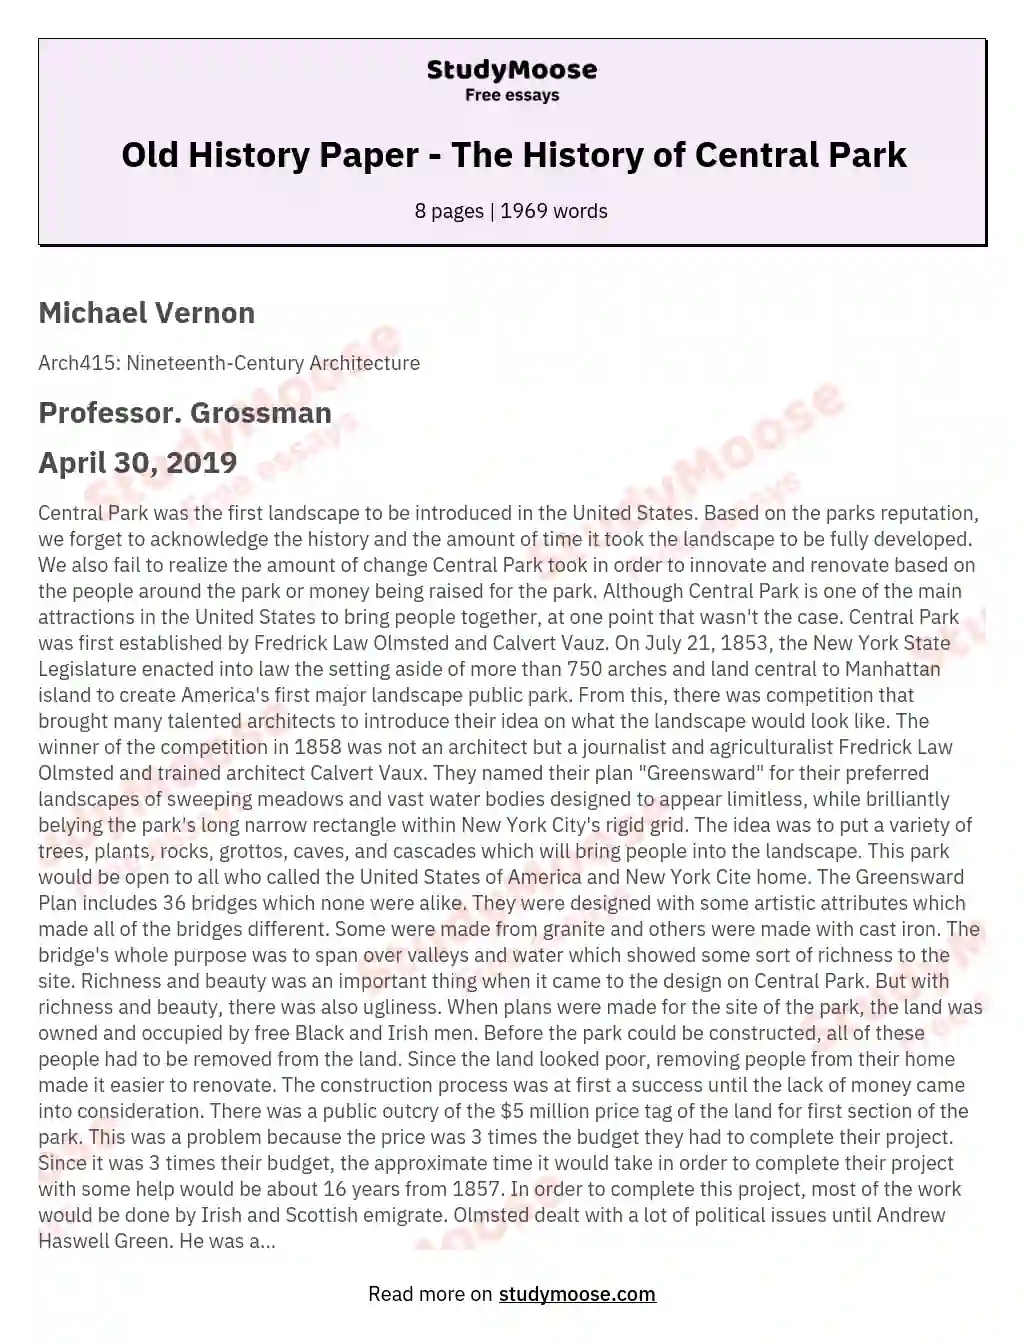 Old History Paper - The History of Central Park